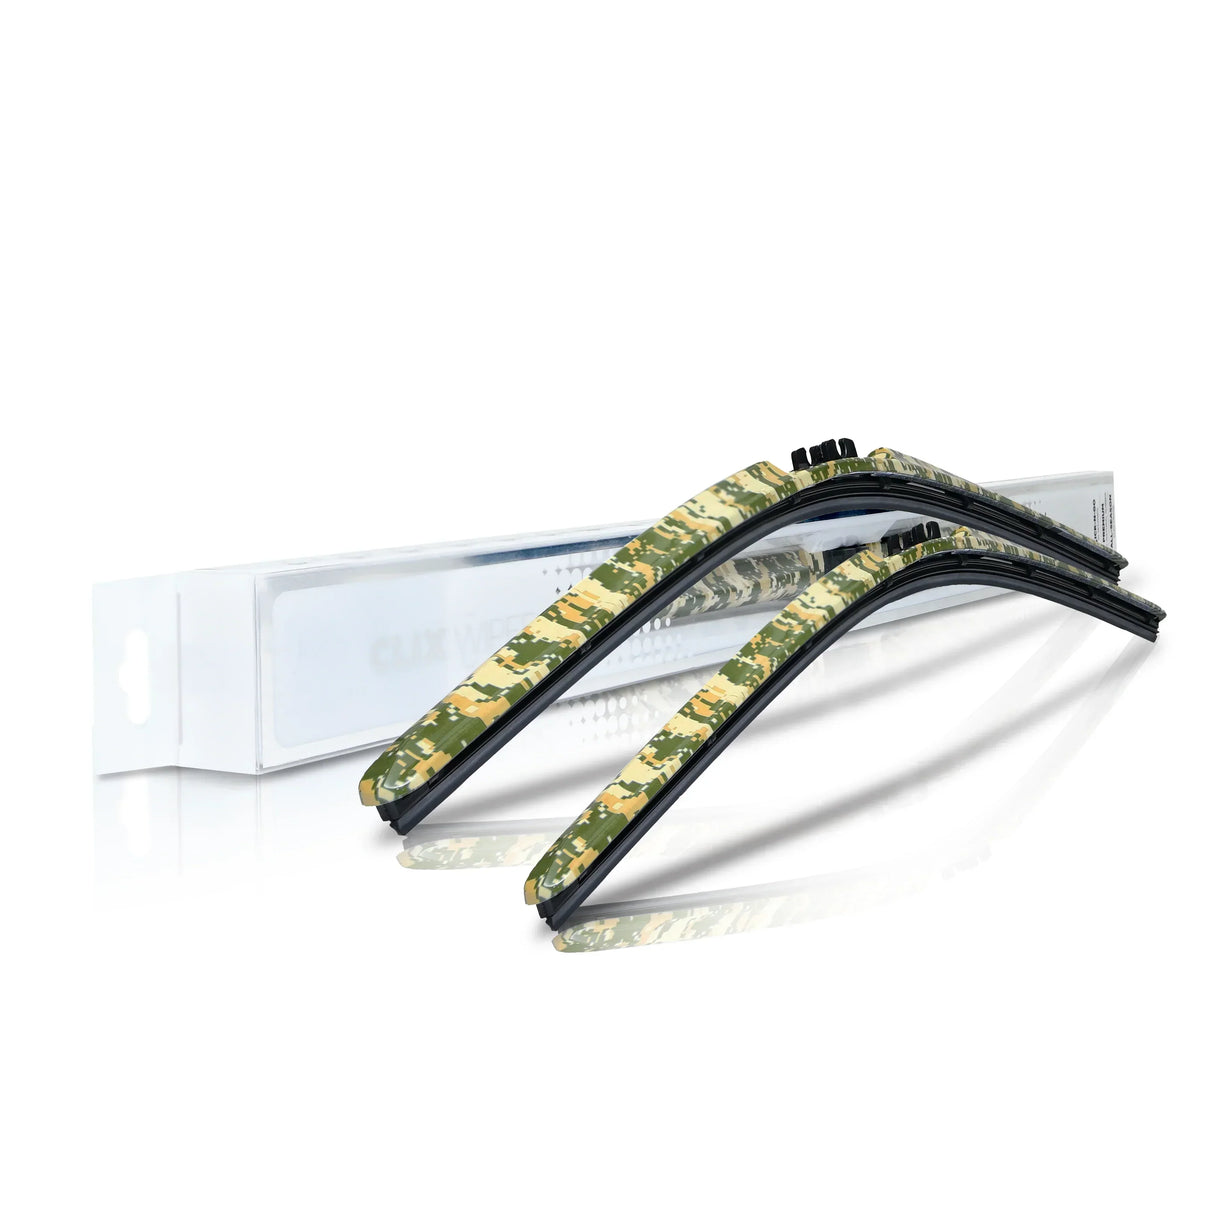 Buick Enclave Windshield Wiper Blades